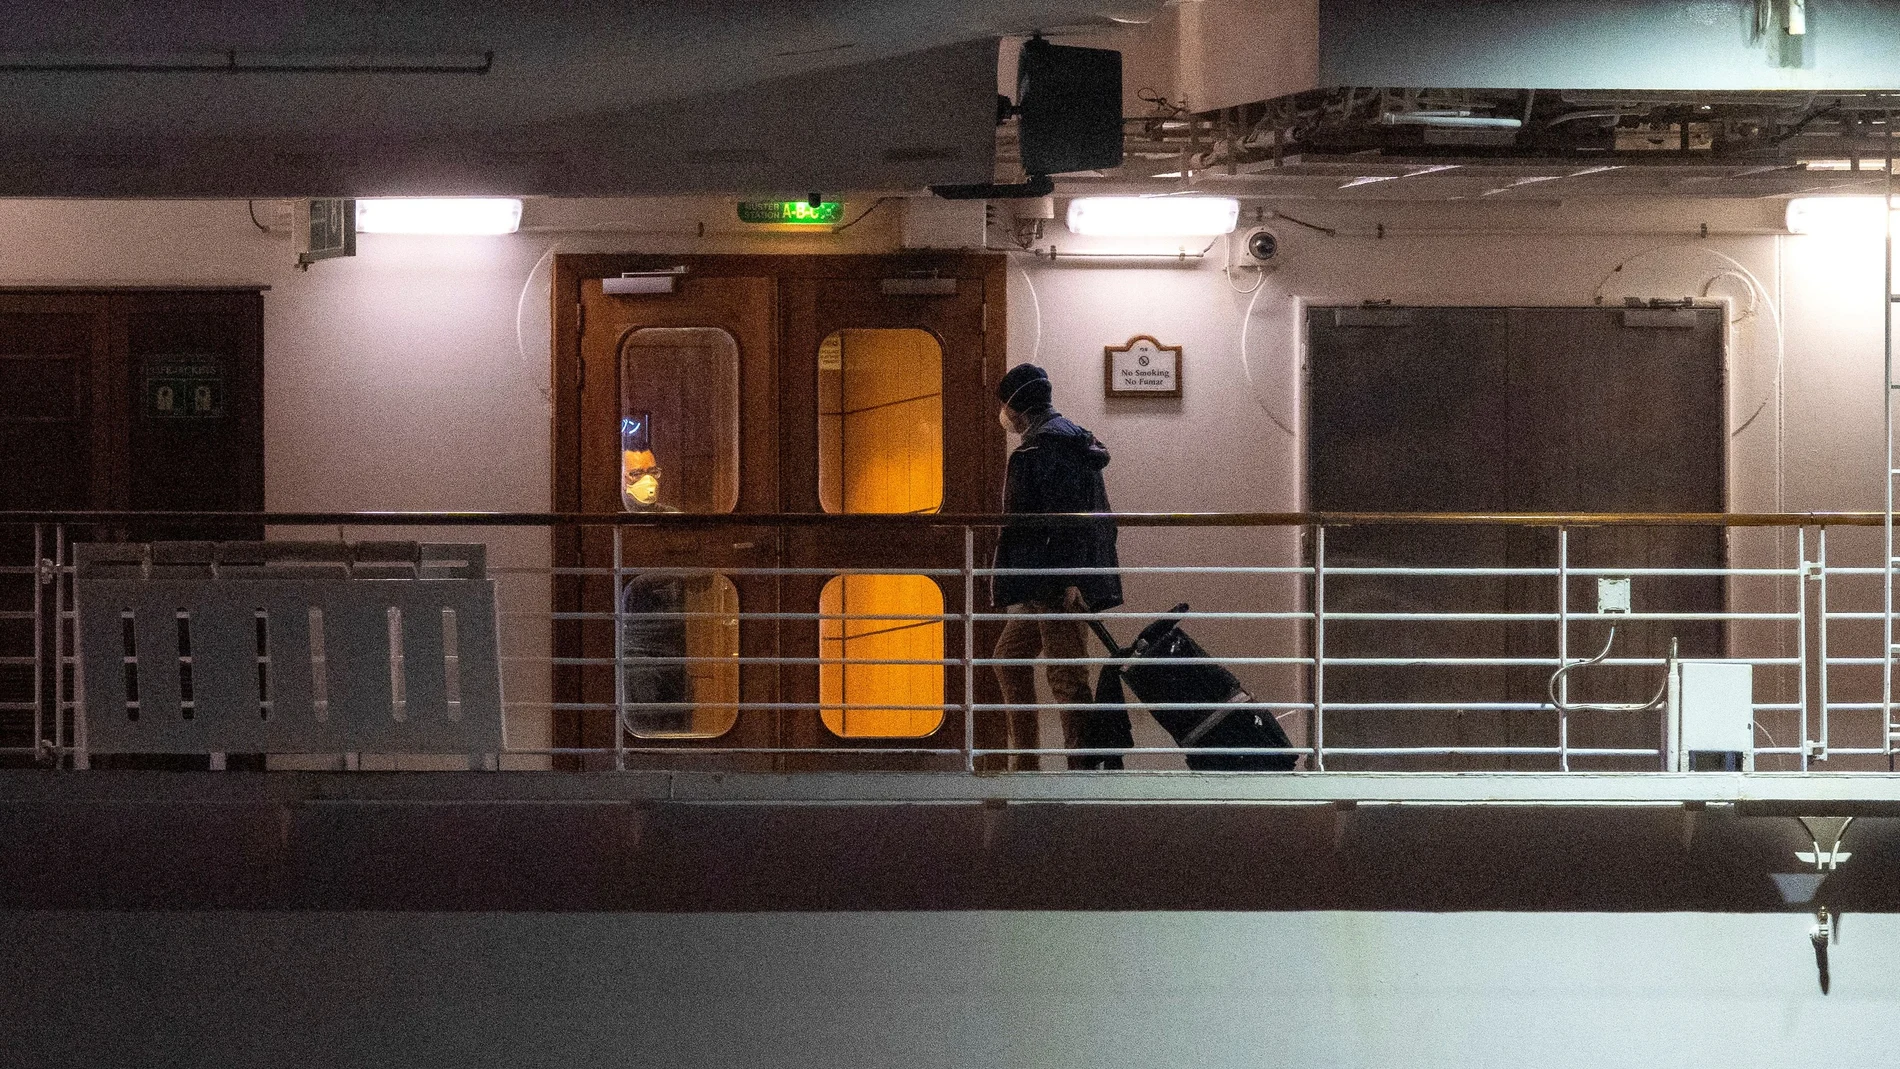 A passenger with his belongings is seen before the evacuation of the U.S. passengers of the Diamond Princess cruise ship, where dozens of passengers tested positive for coronavirus, as they arrive at Daikoku Pier Cruise Terminal in Yokohama